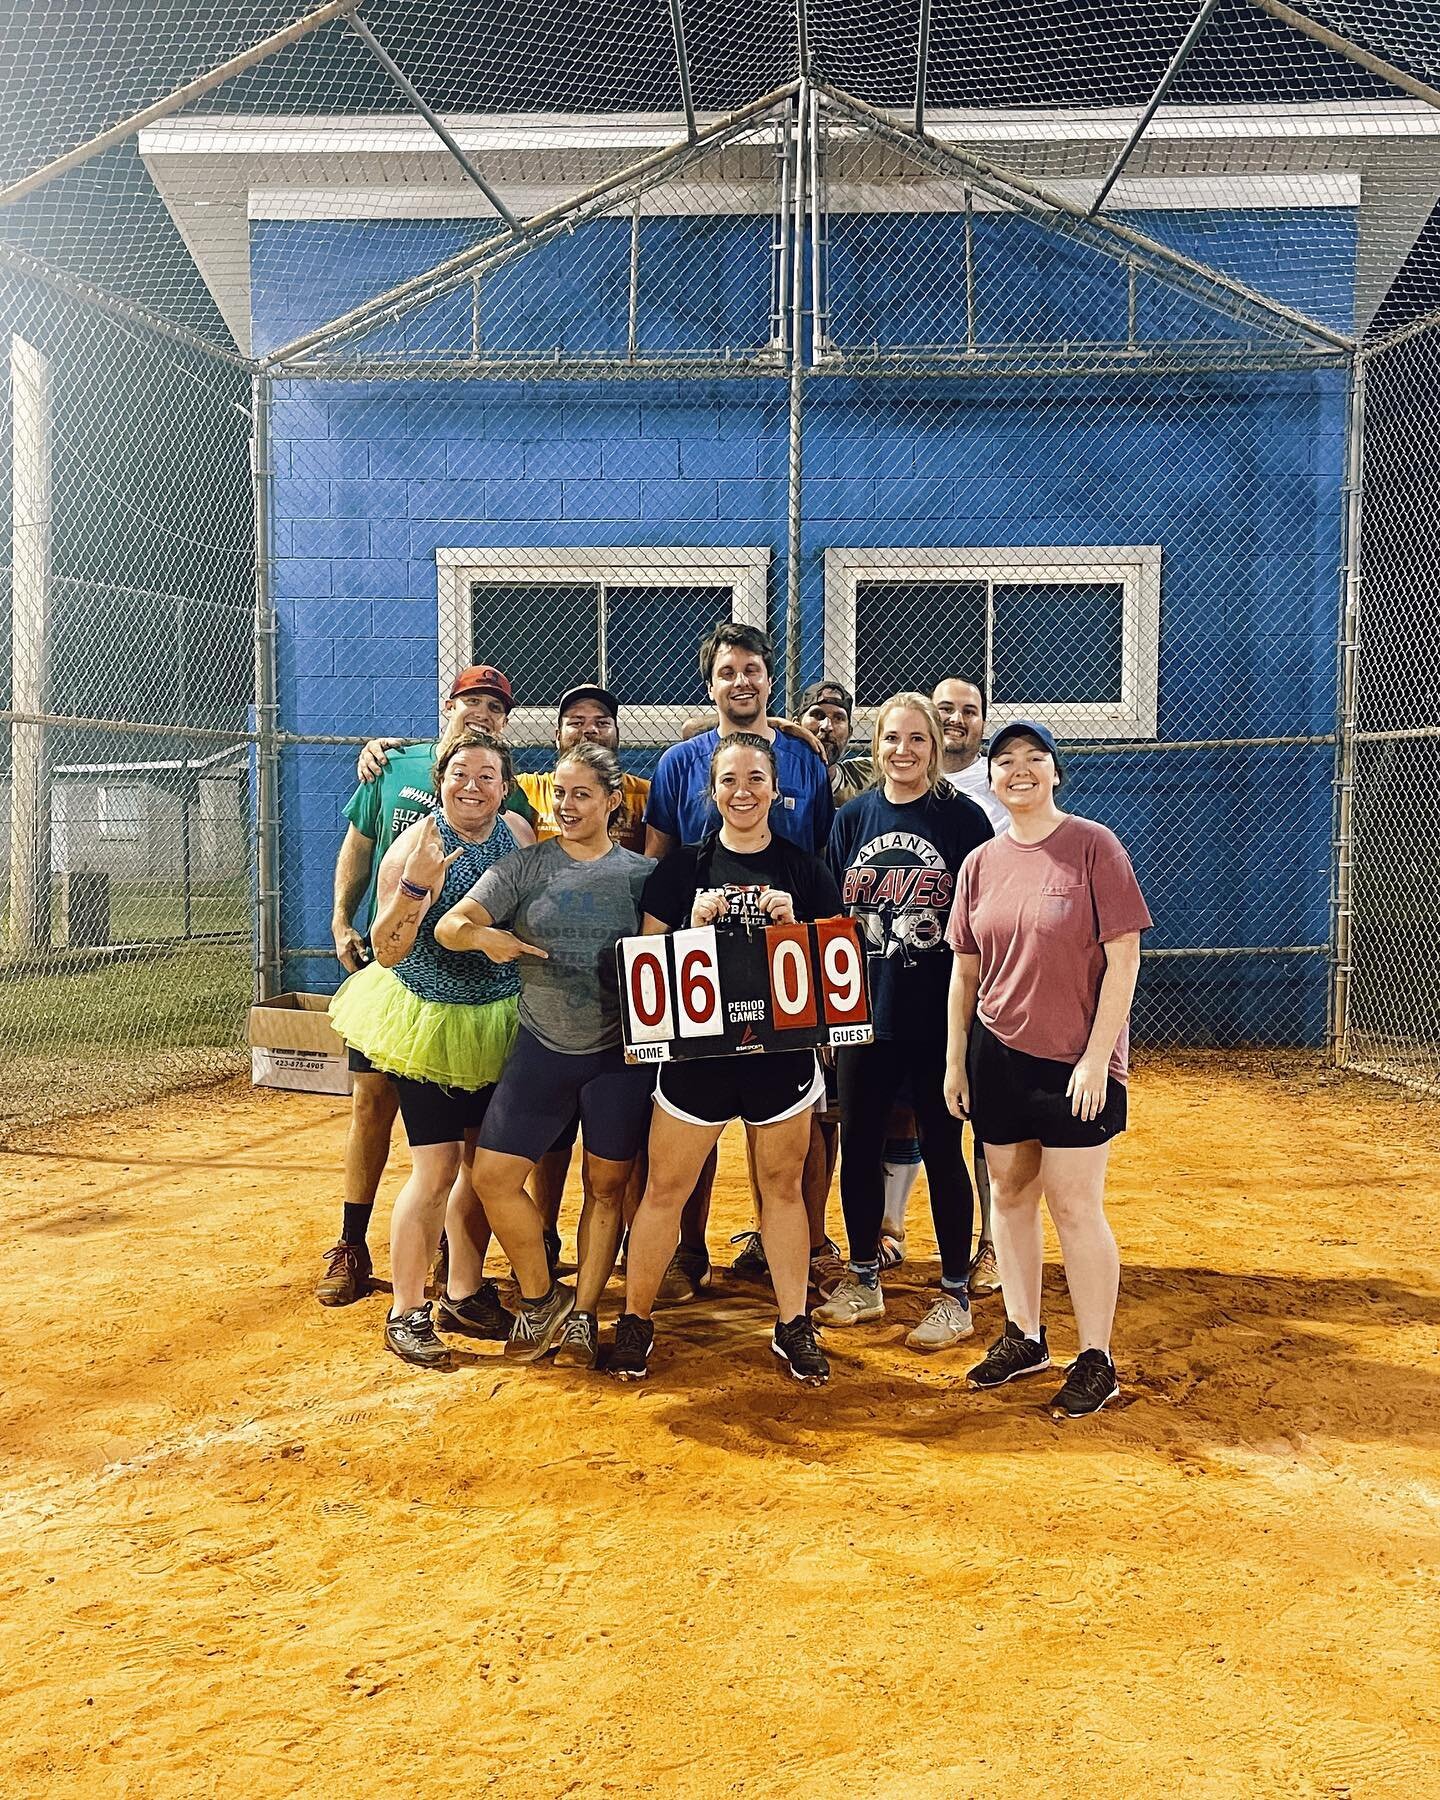 How many kickball players does it take to move your freight? 

If you need one truck or 100, we&rsquo;ve got you covered with a winning team.

Oh and yeah, we won. 

#kickball #logistics #maxtrans